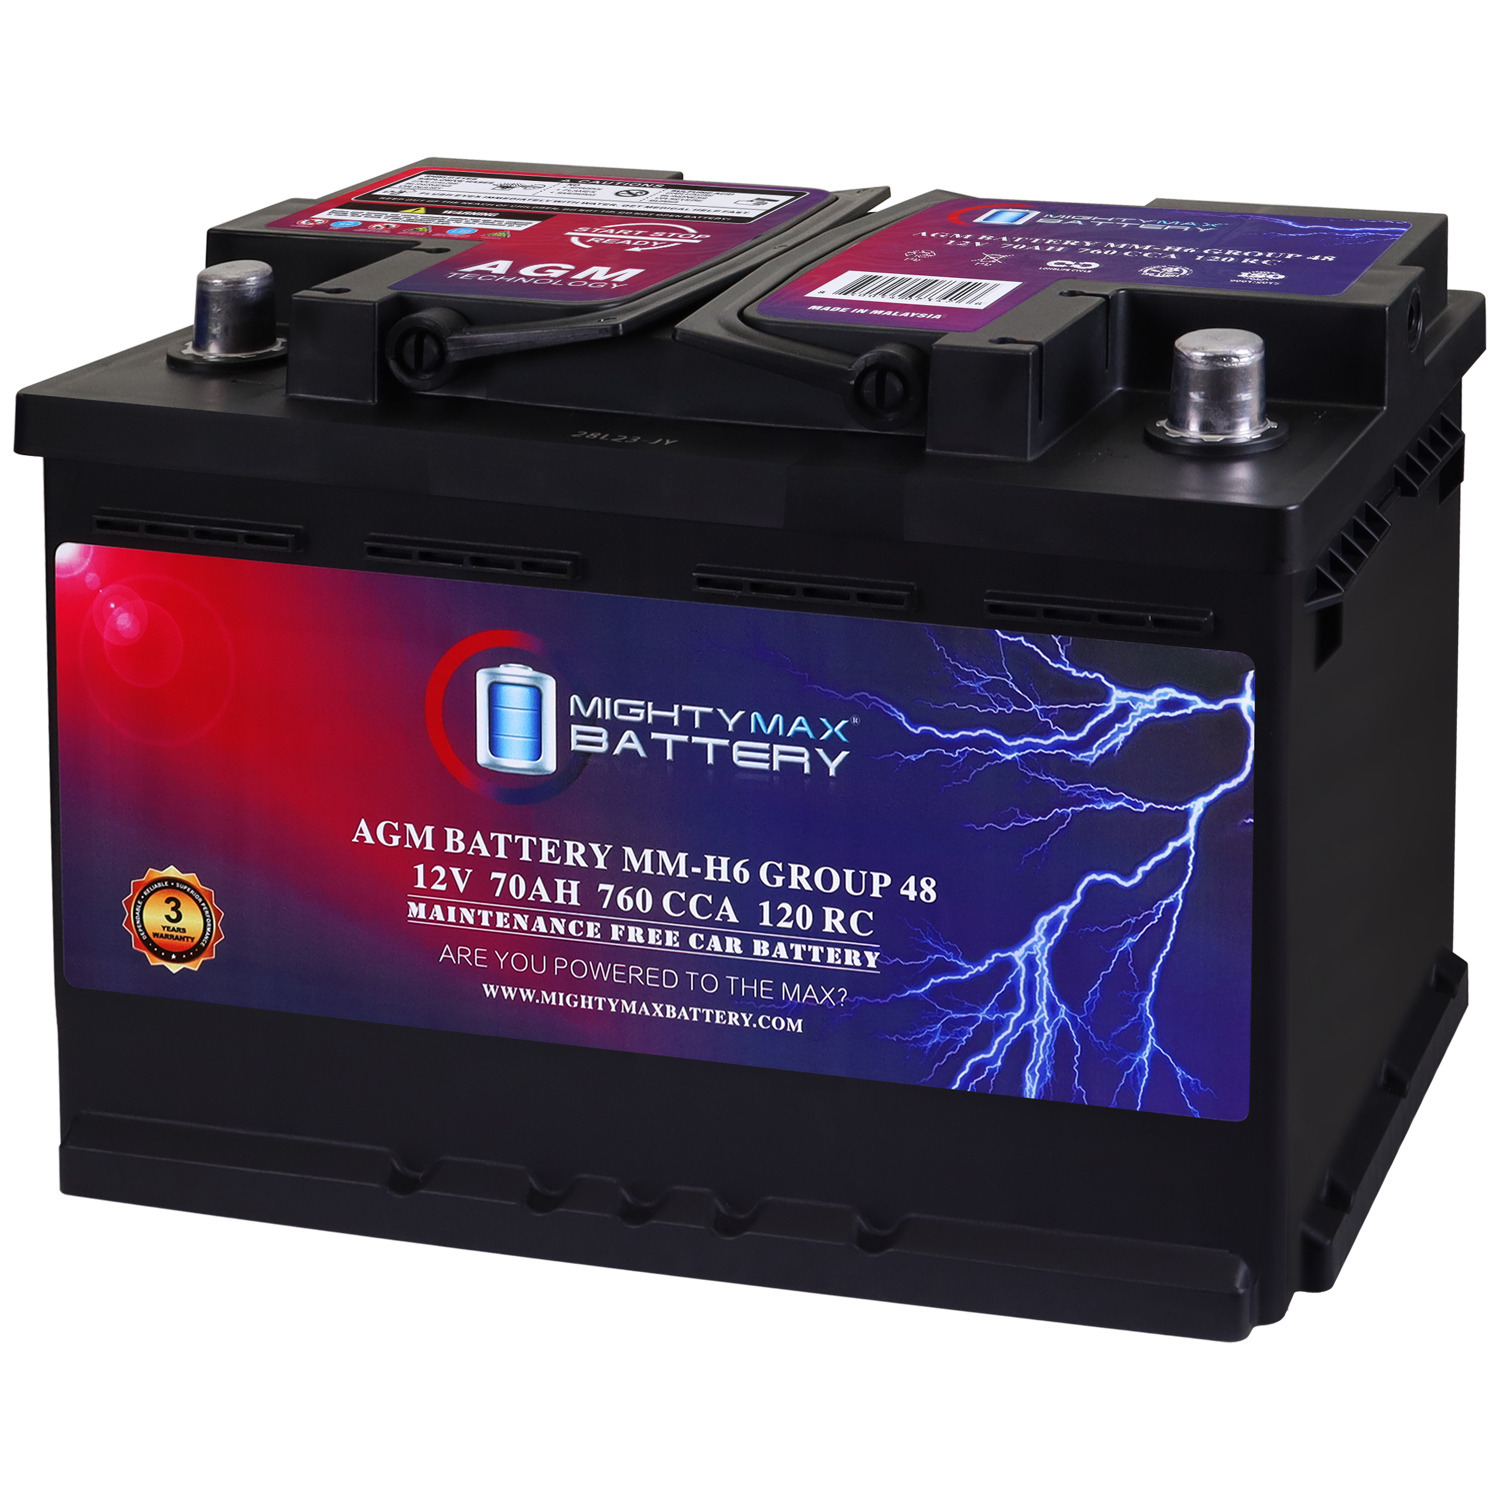 MM-H6 Group 48 12V 70AH 120RC 760CCA Replacement Battery Compatible with Ford Transit-350 15-21